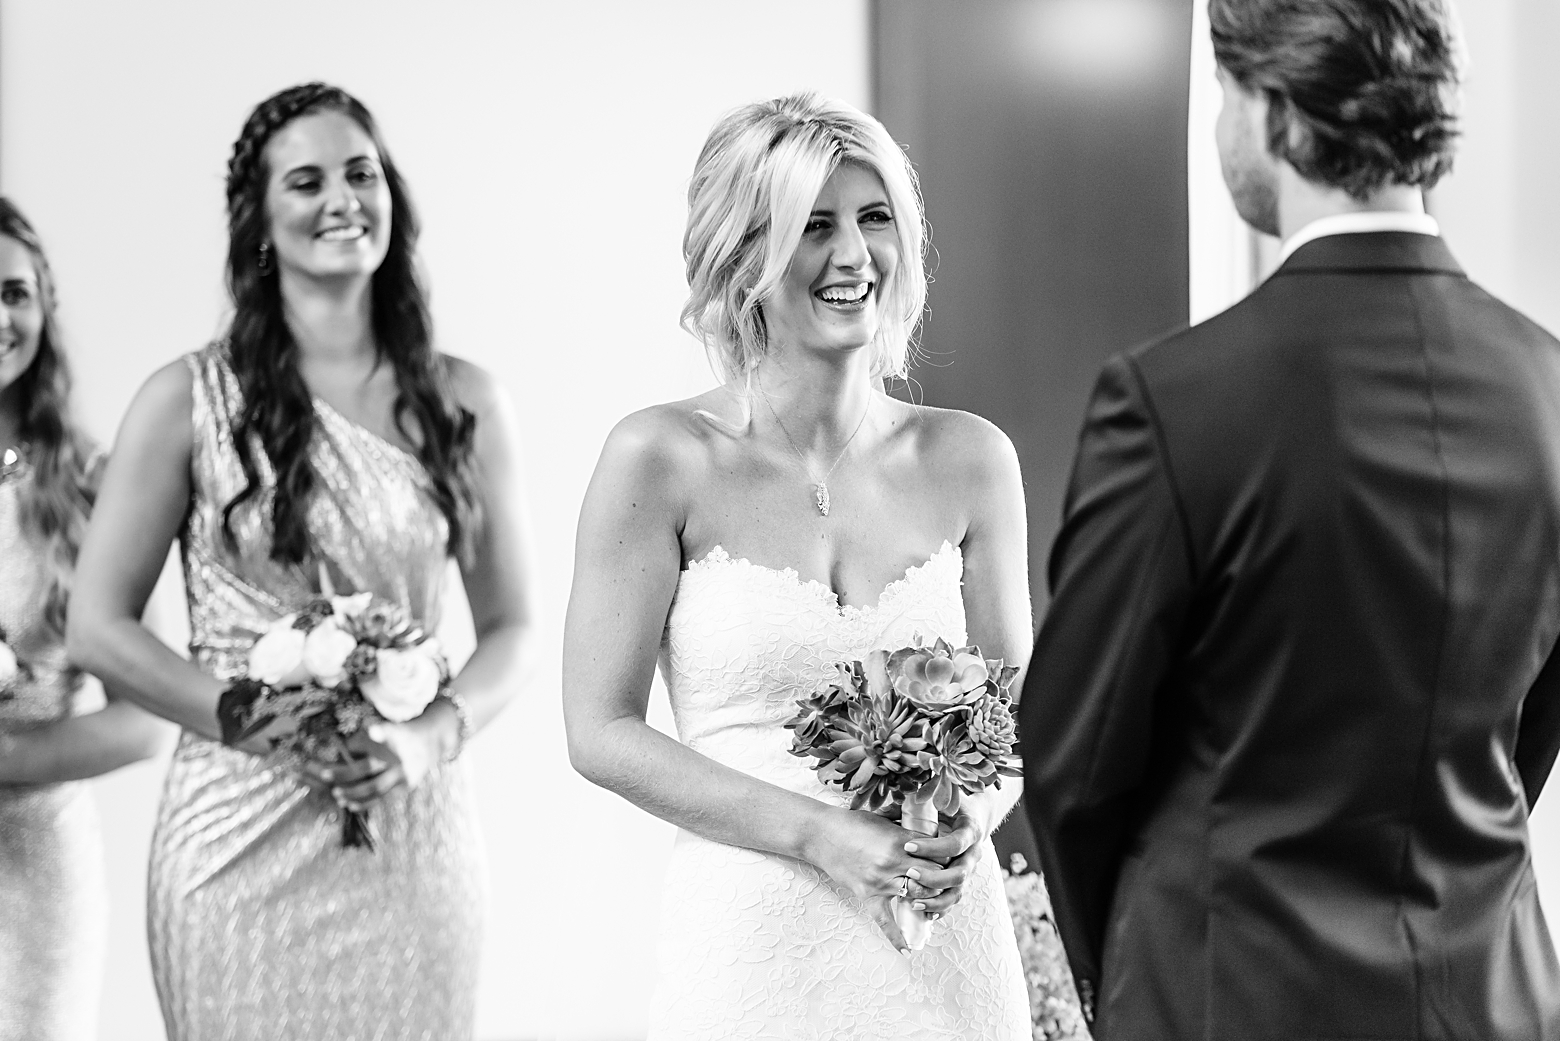 Bride laughs during the Grooms vows in classic black and white